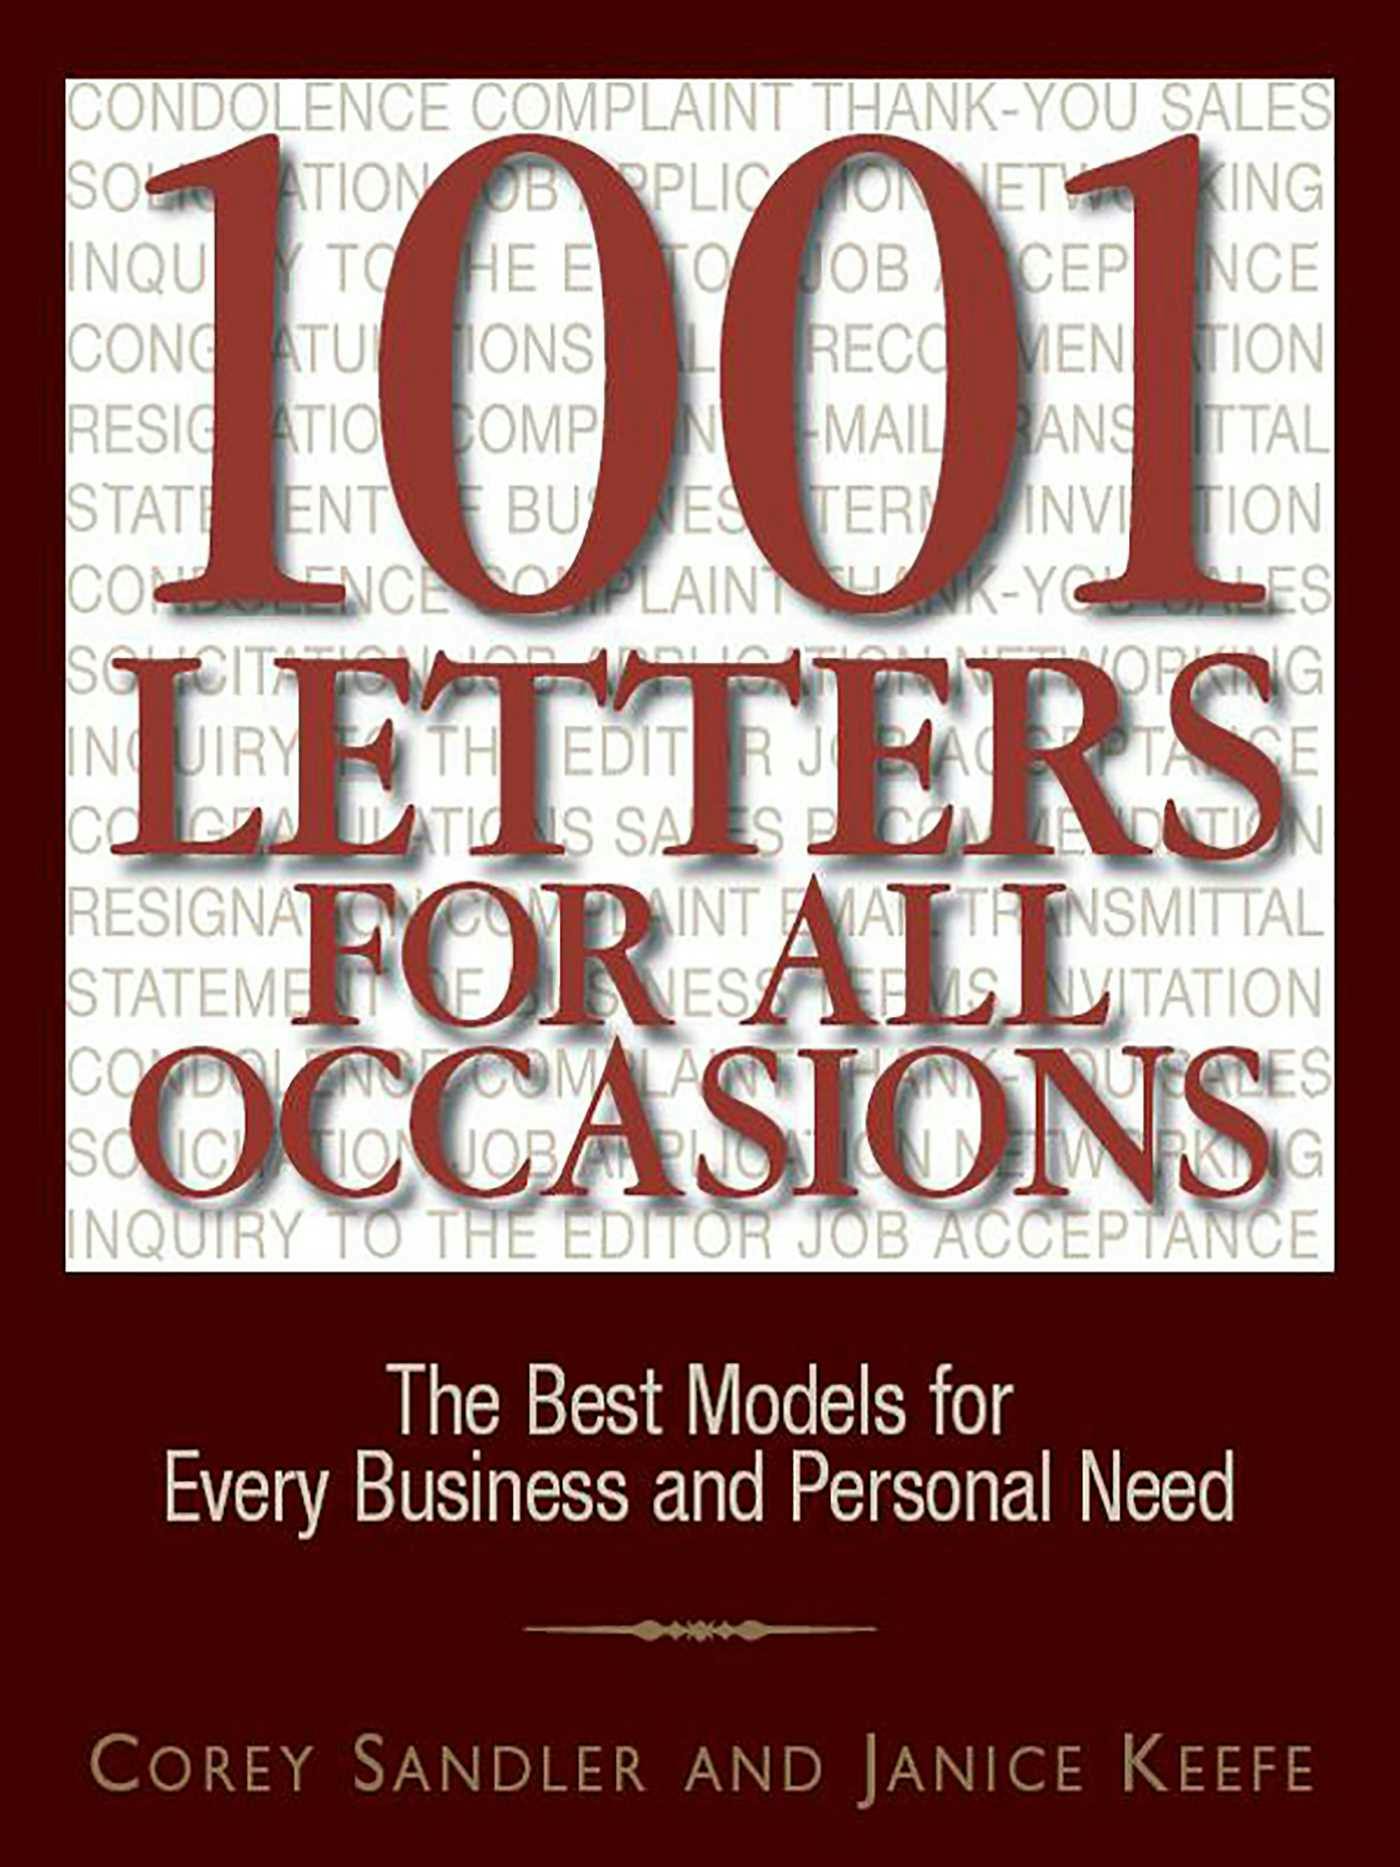 1001 Letters For All Occasions: The Best Models for Every Business and Personal Need - Corey Sandler, Janice Keefe